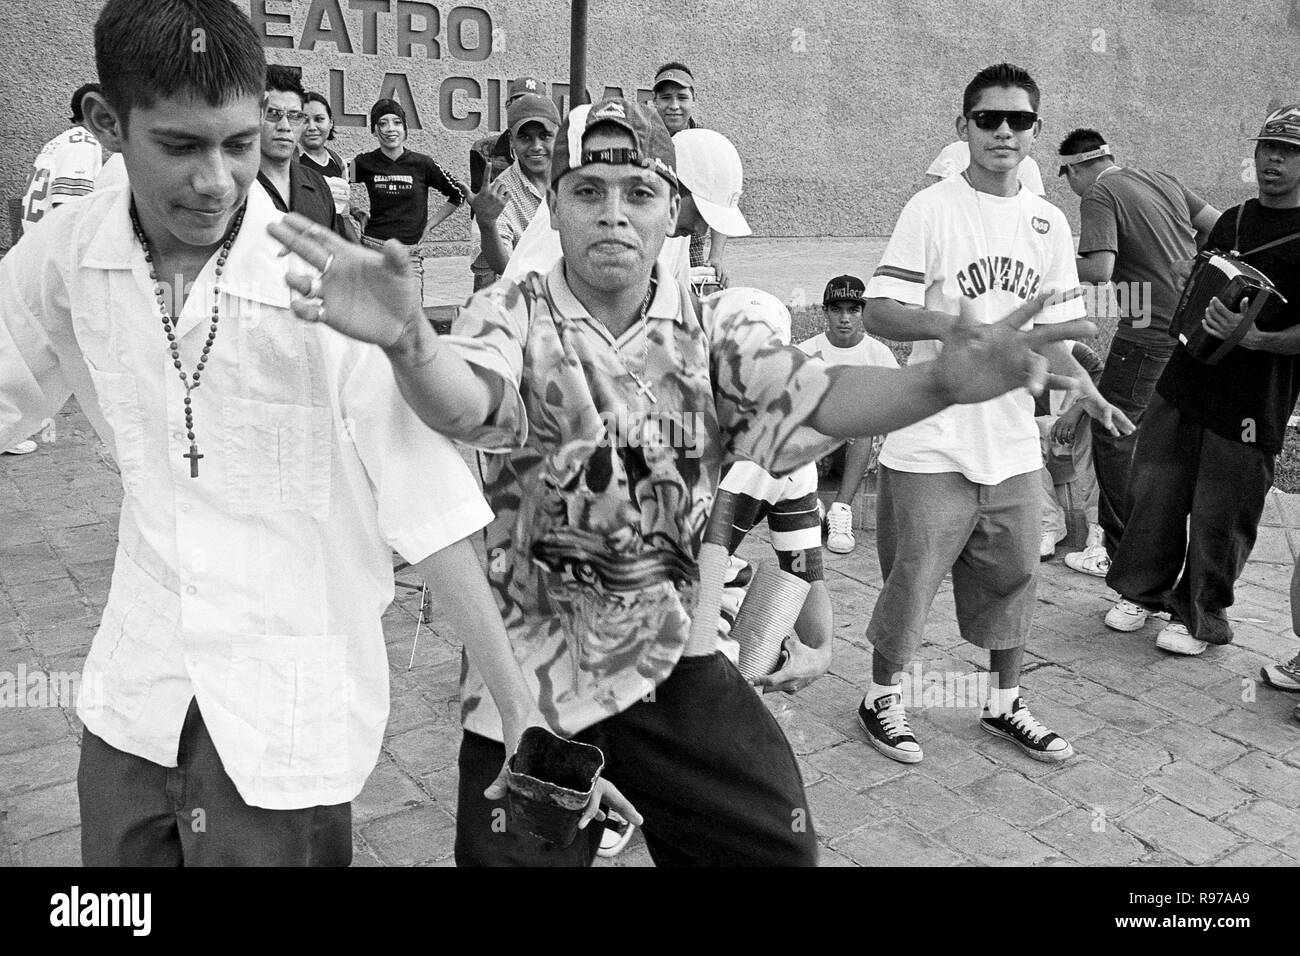 MONTERREY, NL/MEXICO - NOV 2, 2003: A group of young people play and dance Cumbia by the City Theater at the Macroplaza Stock Photo